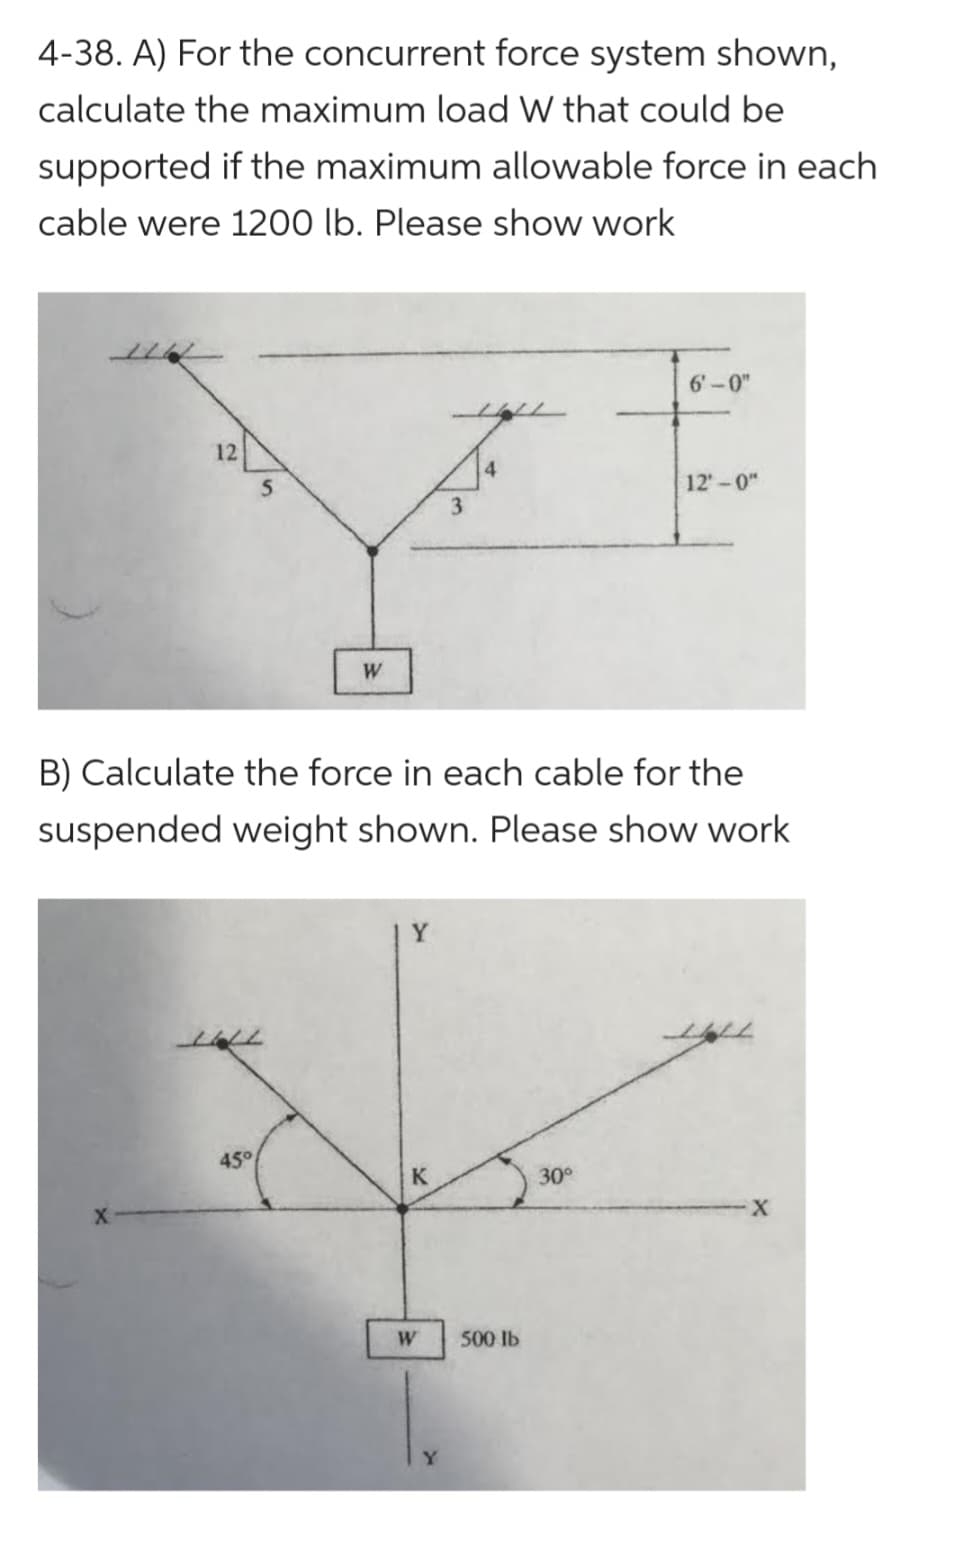 4-38. A) For the concurrent force system shown,
calculate the maximum load W that could be
supported if the maximum allowable force in each
cable were 1200 lb. Please show work
12
5
45°
W
J
3
B) Calculate the force in each cable for the
suspended weight shown. Please show work
Y
K
W
500 lb
6'-0"
30°
12'-0"